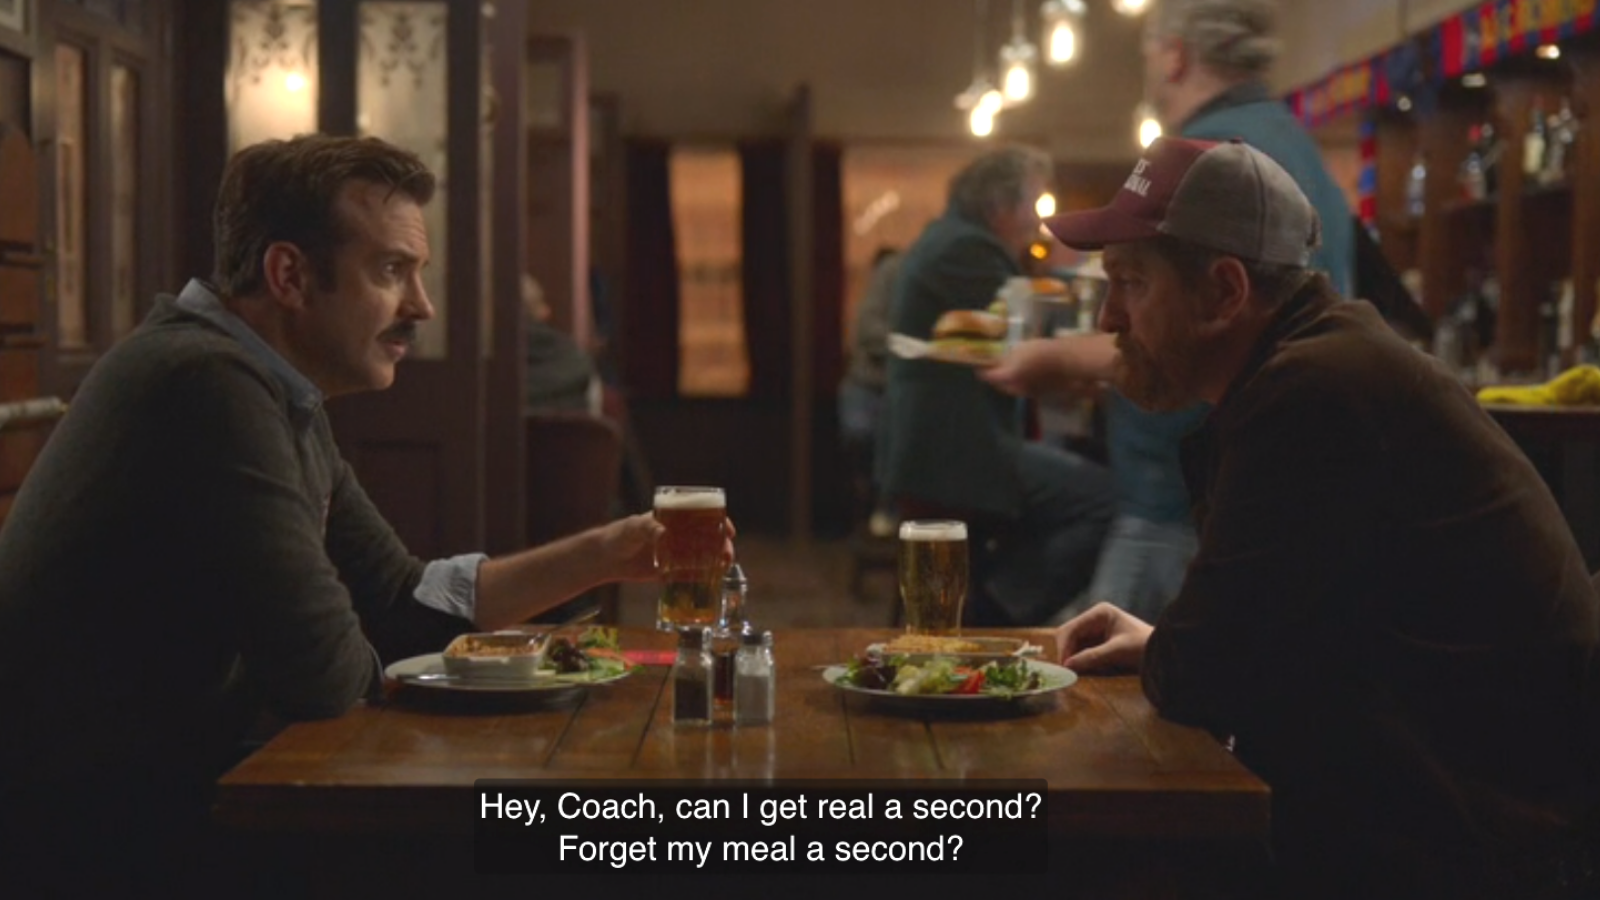 a still of Ted and Beard in a bar. Ted says, "Hey Coach, can I get real a second? Forget my meal a second?"